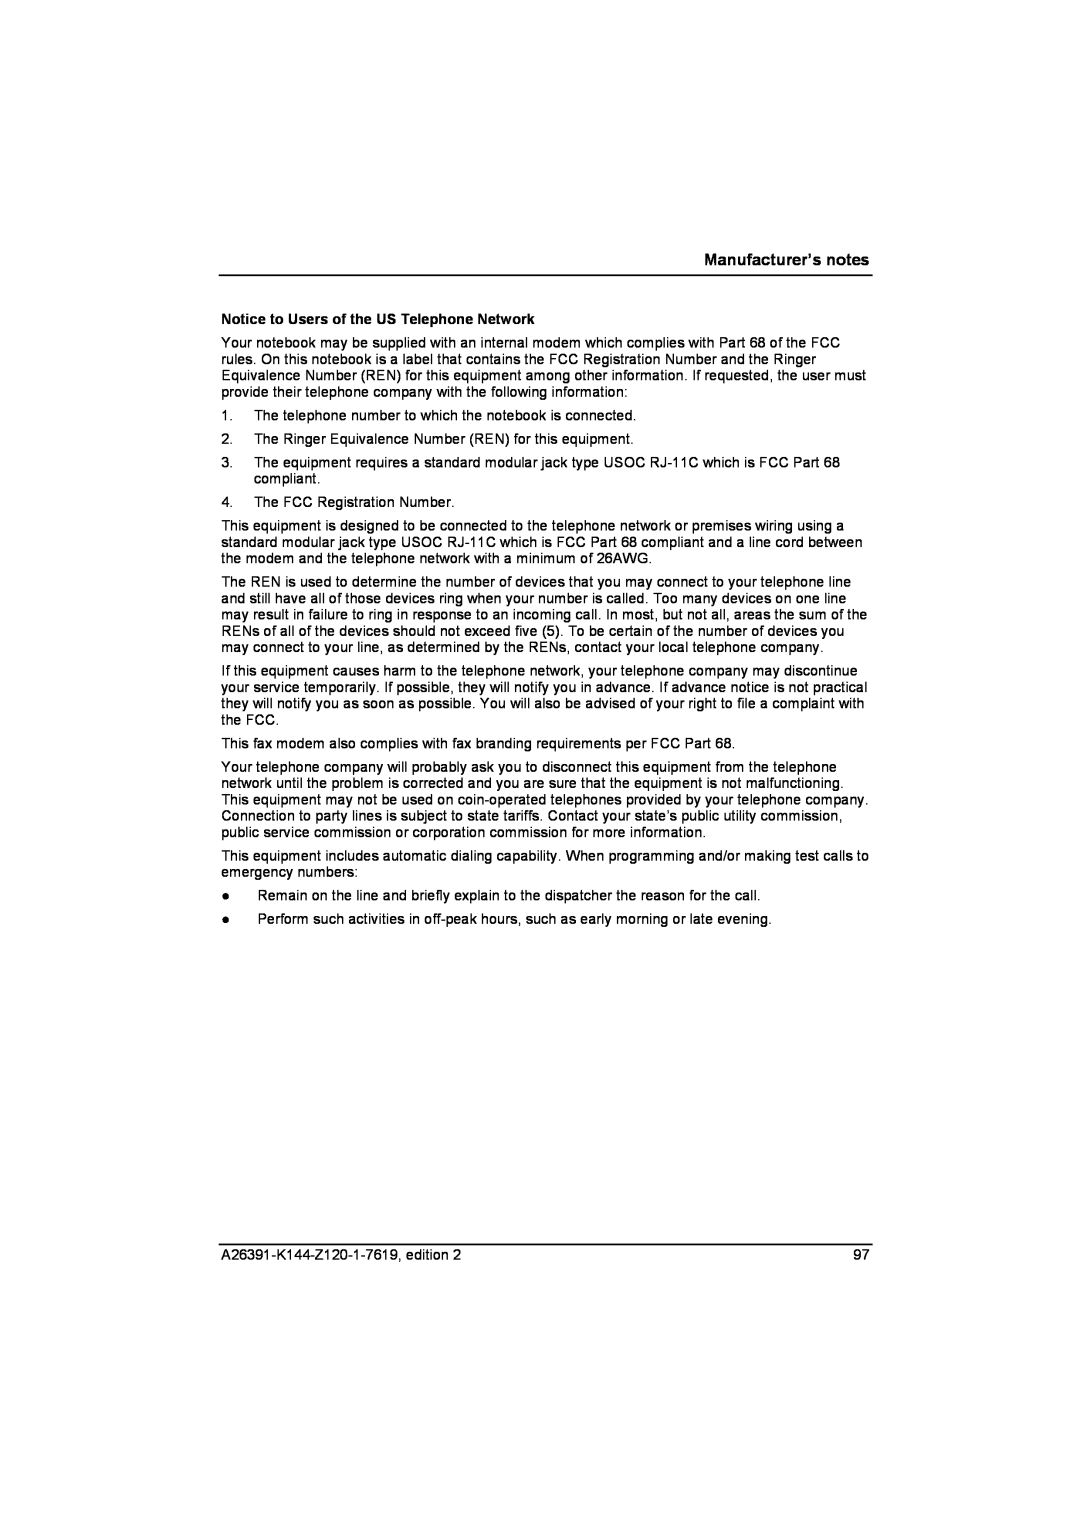 Fujitsu S SERIES manual Notice to Users of the US Telephone Network, Manufacturer’s notes 